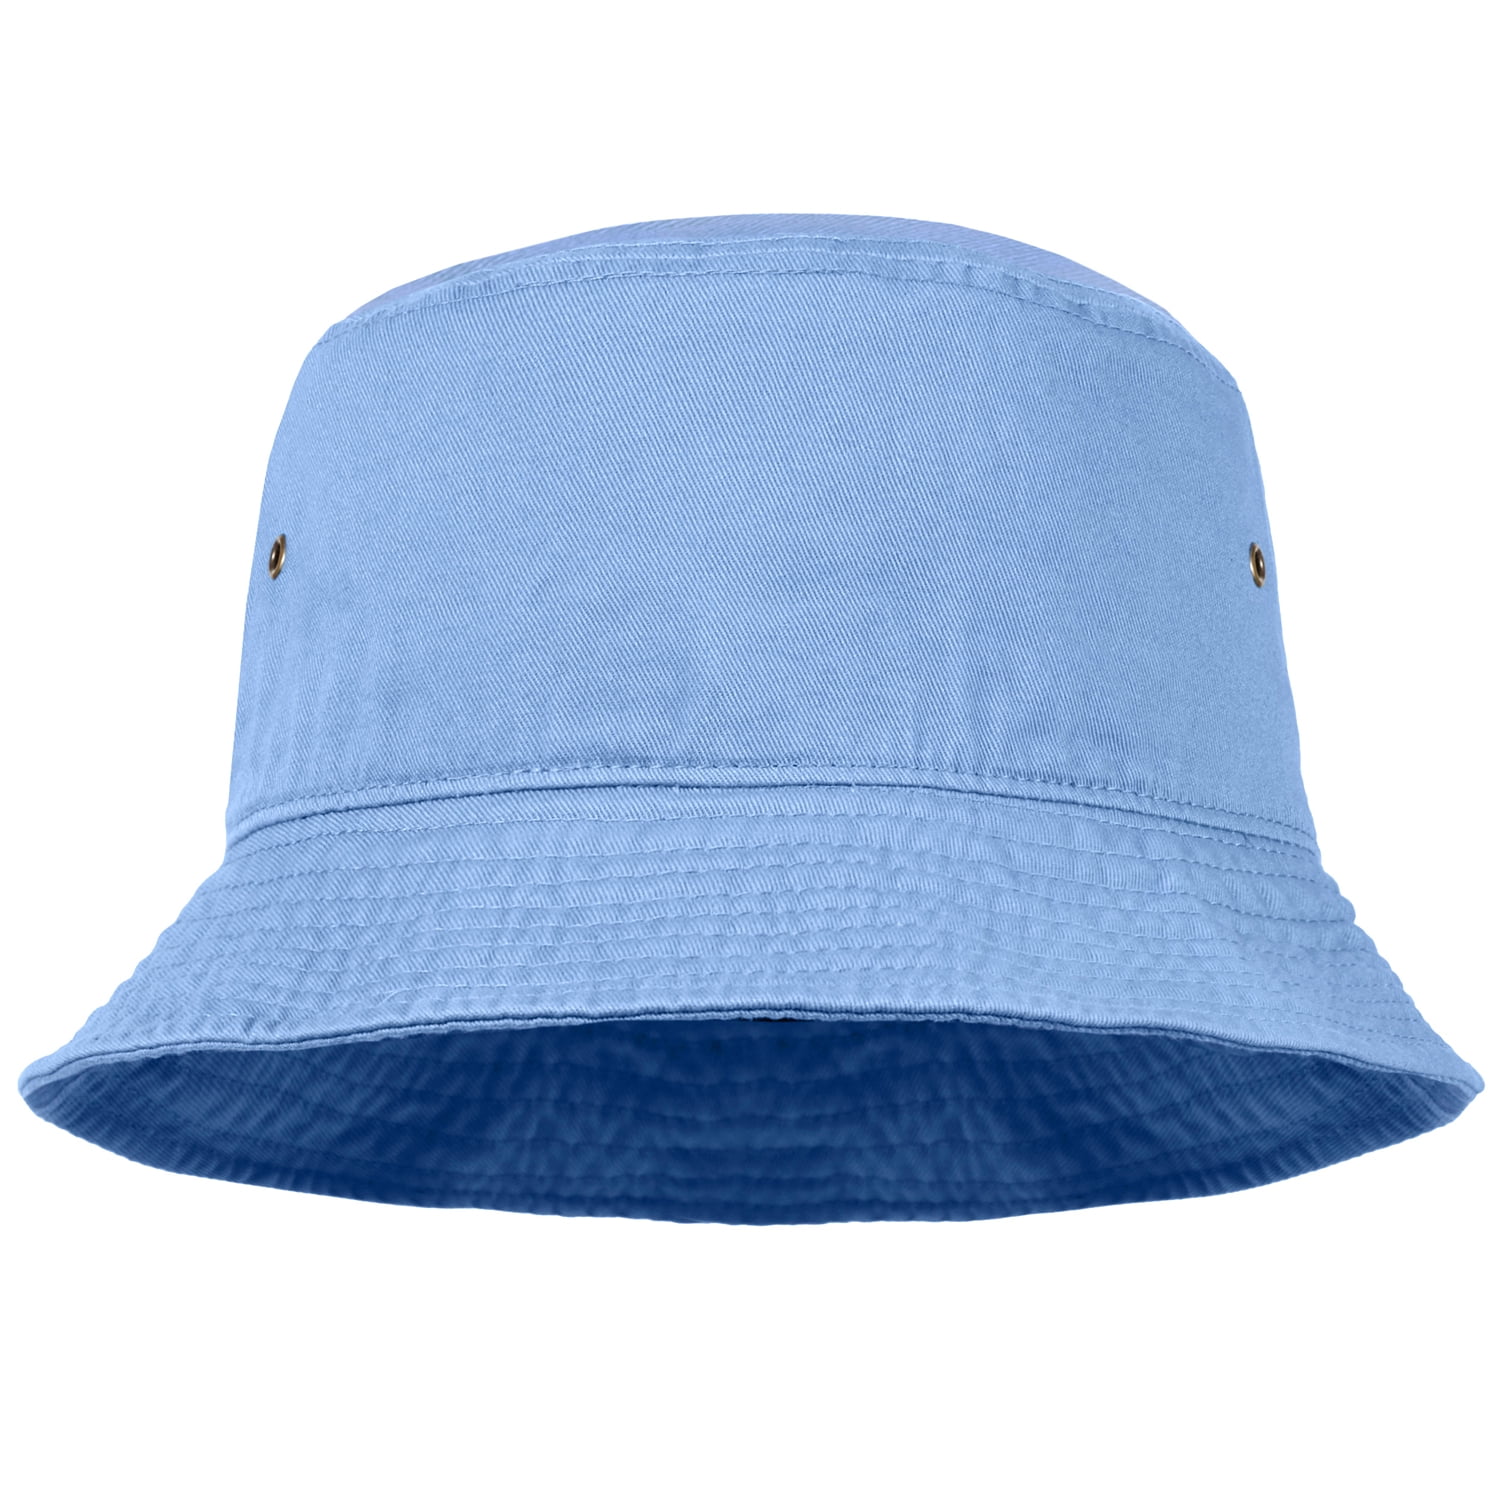 Unisex Cotton Boonie Hat Summer Outdoor Packable Fishing